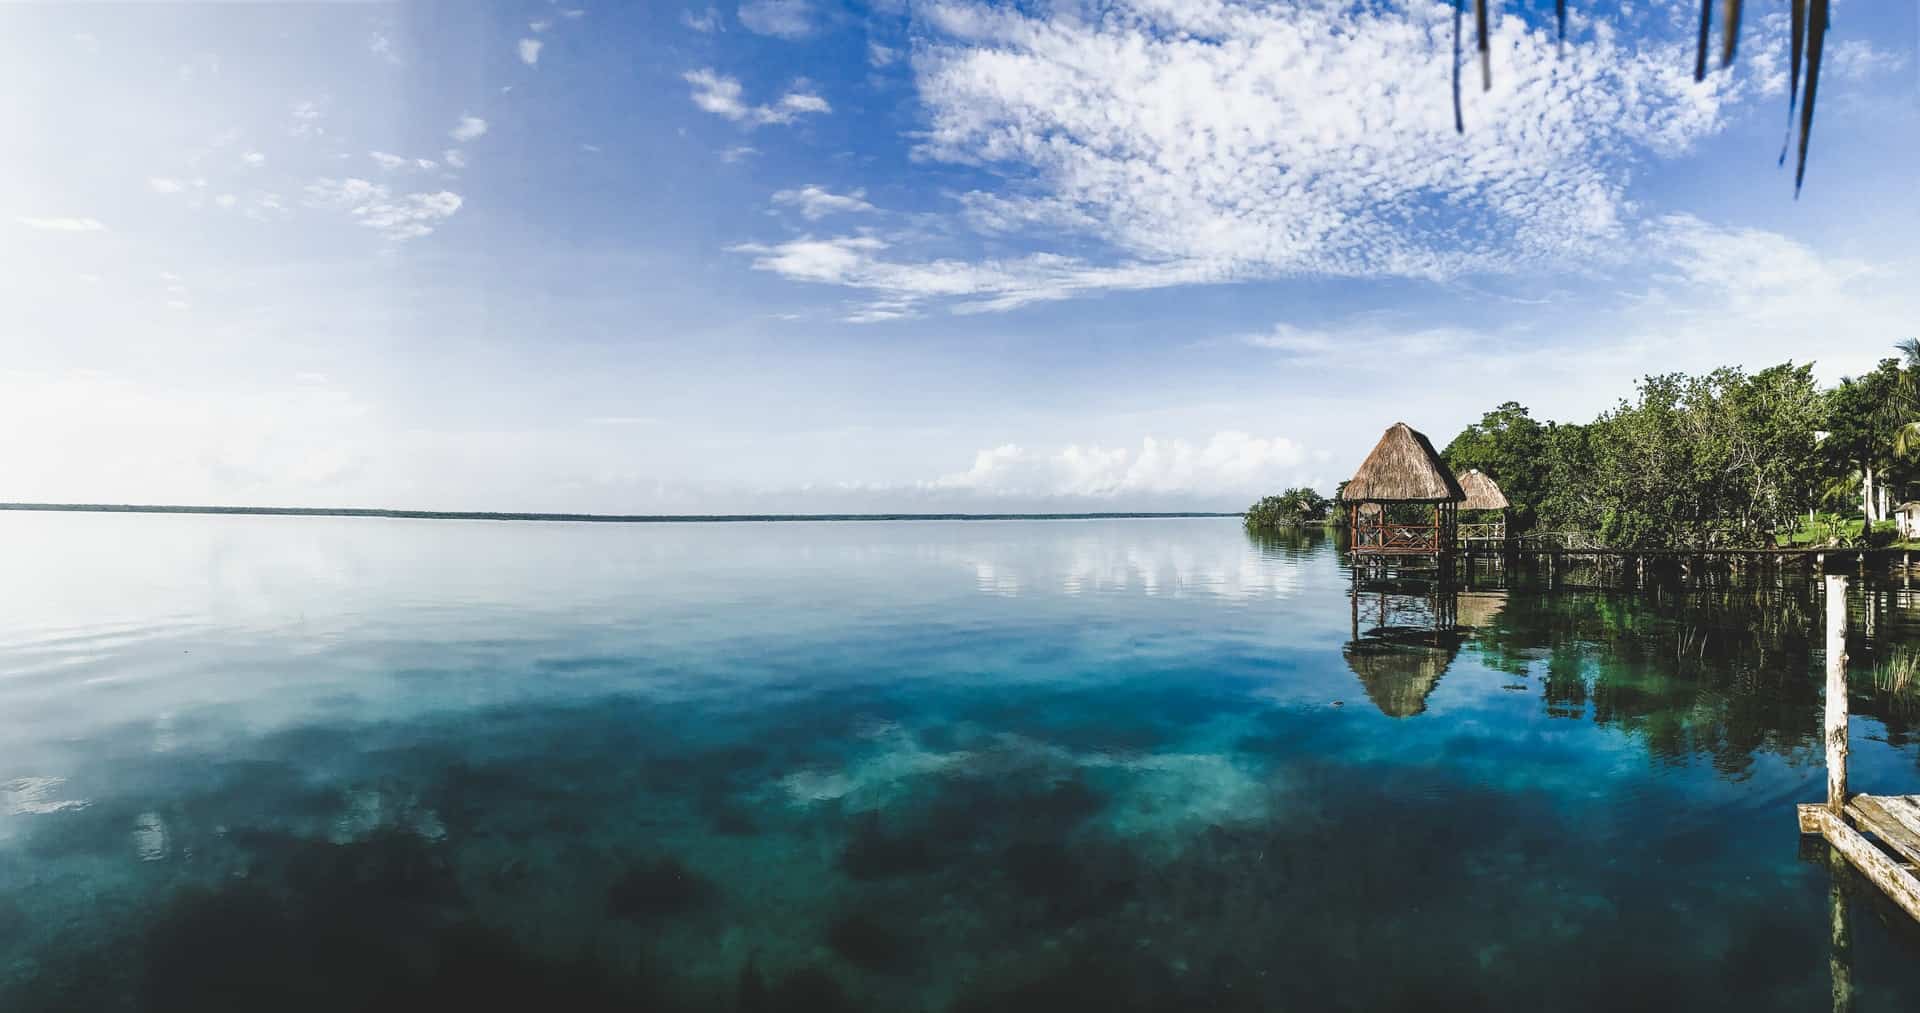 Best things to do in Bacalar Mexico - Katrina Julia - Bacalar Lagoon by Camila Vázquez on Unsplash